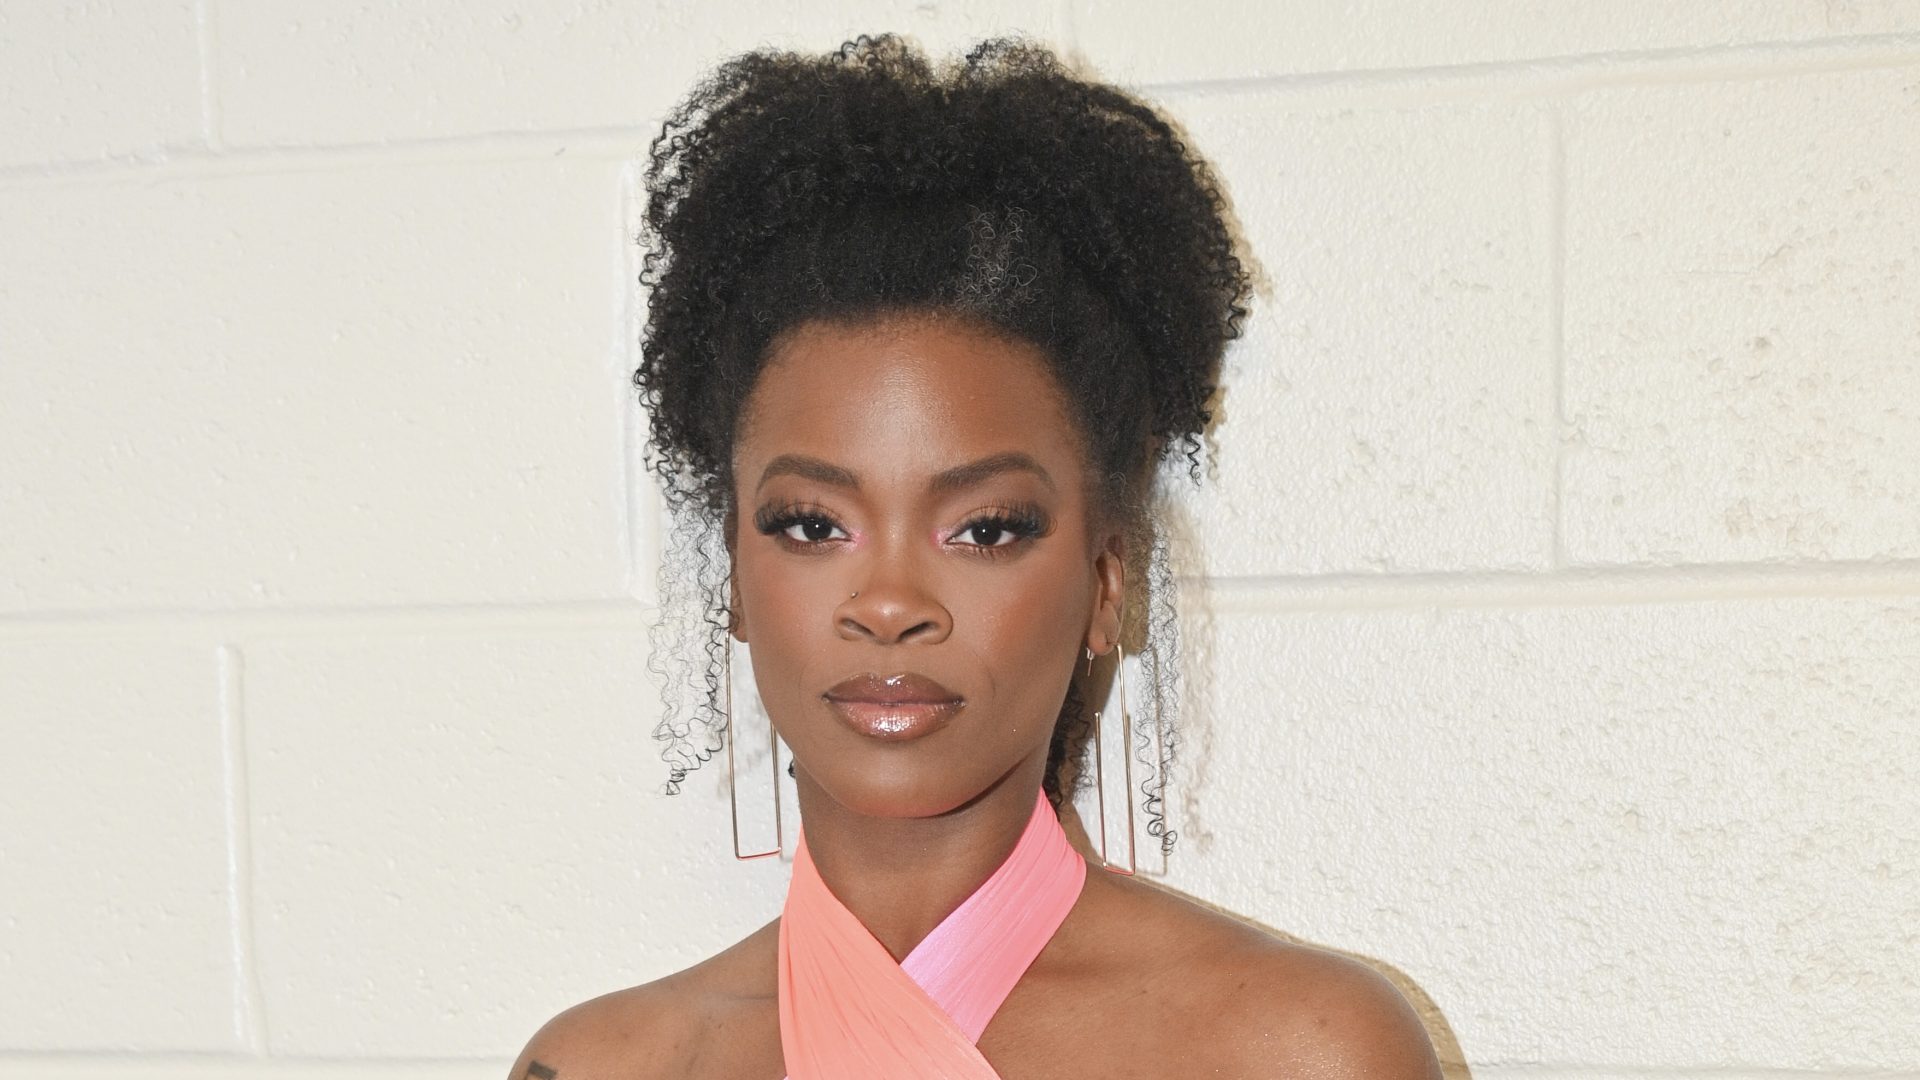 Don't Play With Her! Ari Lennox Comes Close To Throwin' Hands With A Fan: "Don't You Ever Disrespect A Beautiful Black Woman"